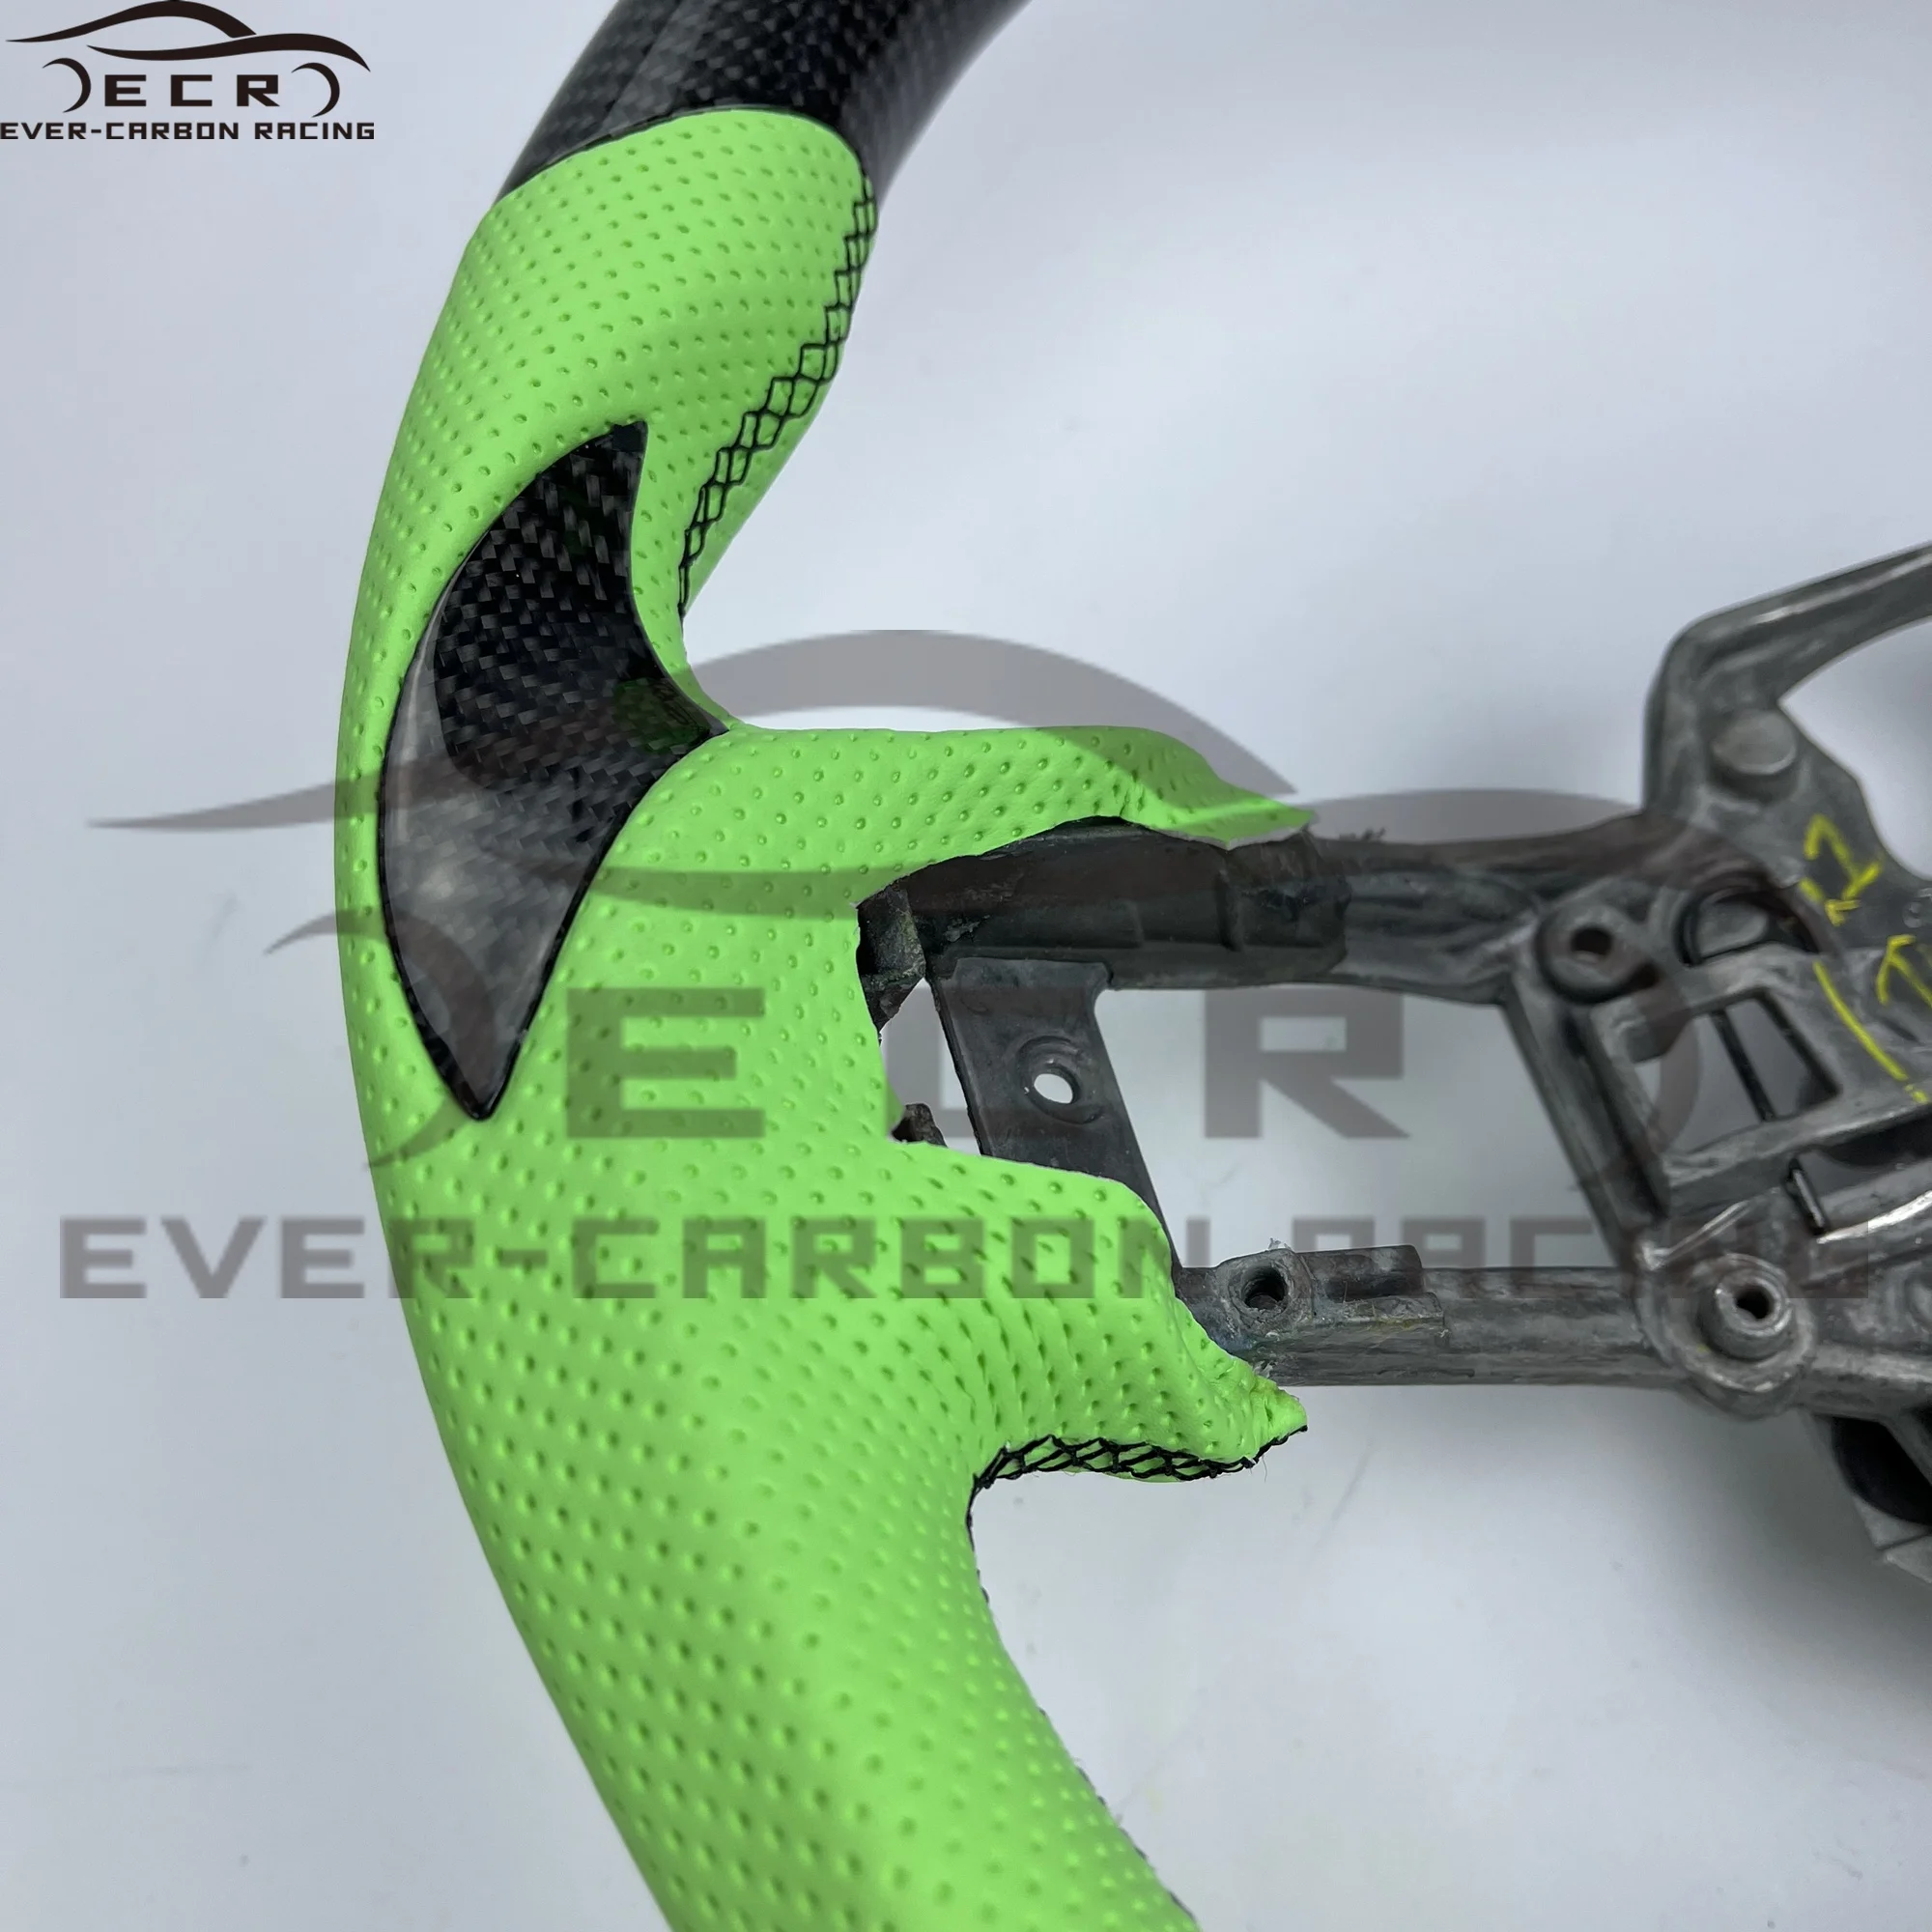 Ever-Carbon Racing(ECR) Wholesale China Factory Carbon Fiber Steering Wheel For 2020 Mustang Steering Wheel